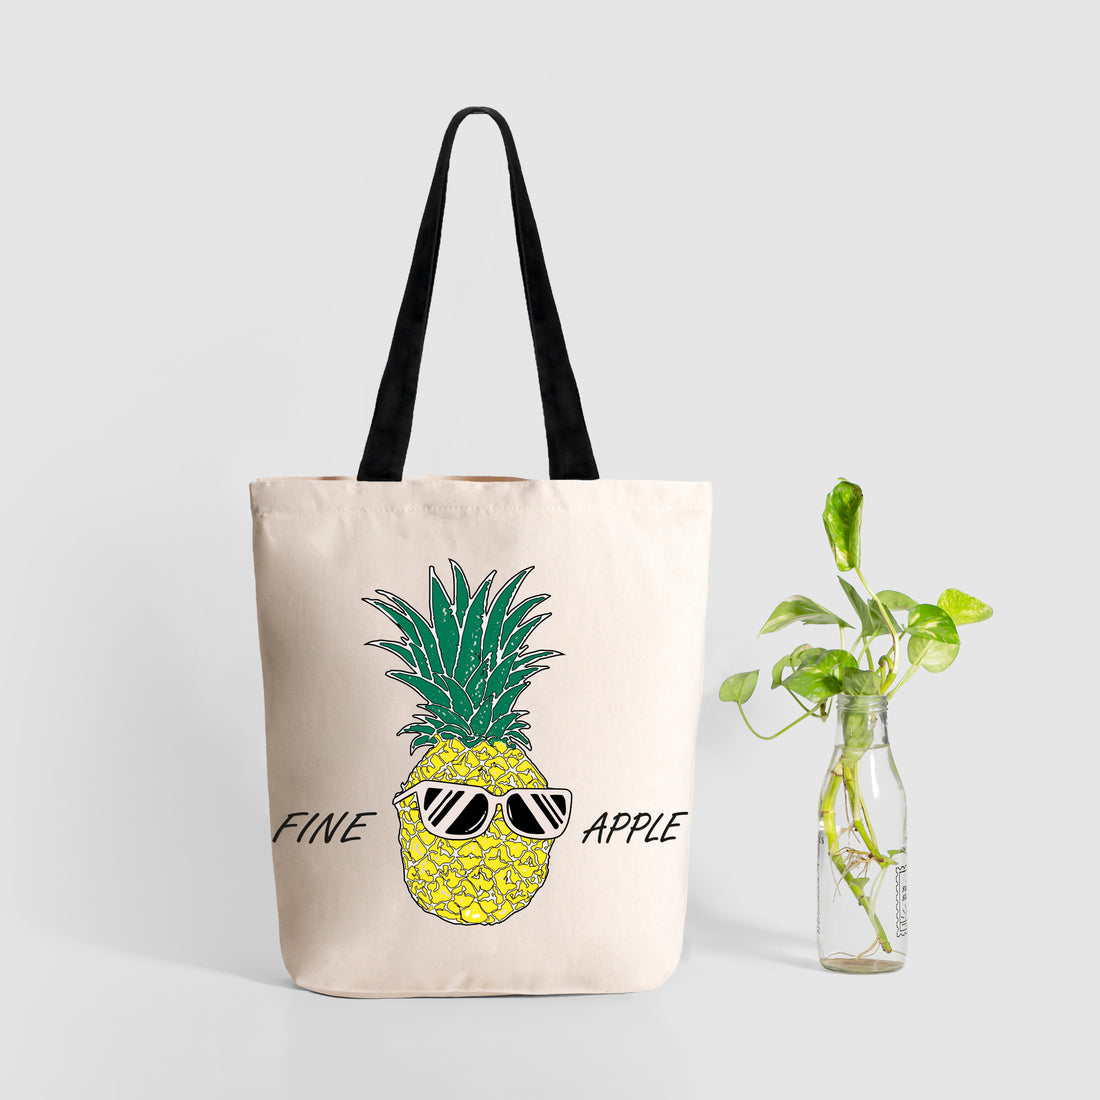 Tote bags for women college, Side bags ladies, Tote bag purse, Birthday gifts, Women&